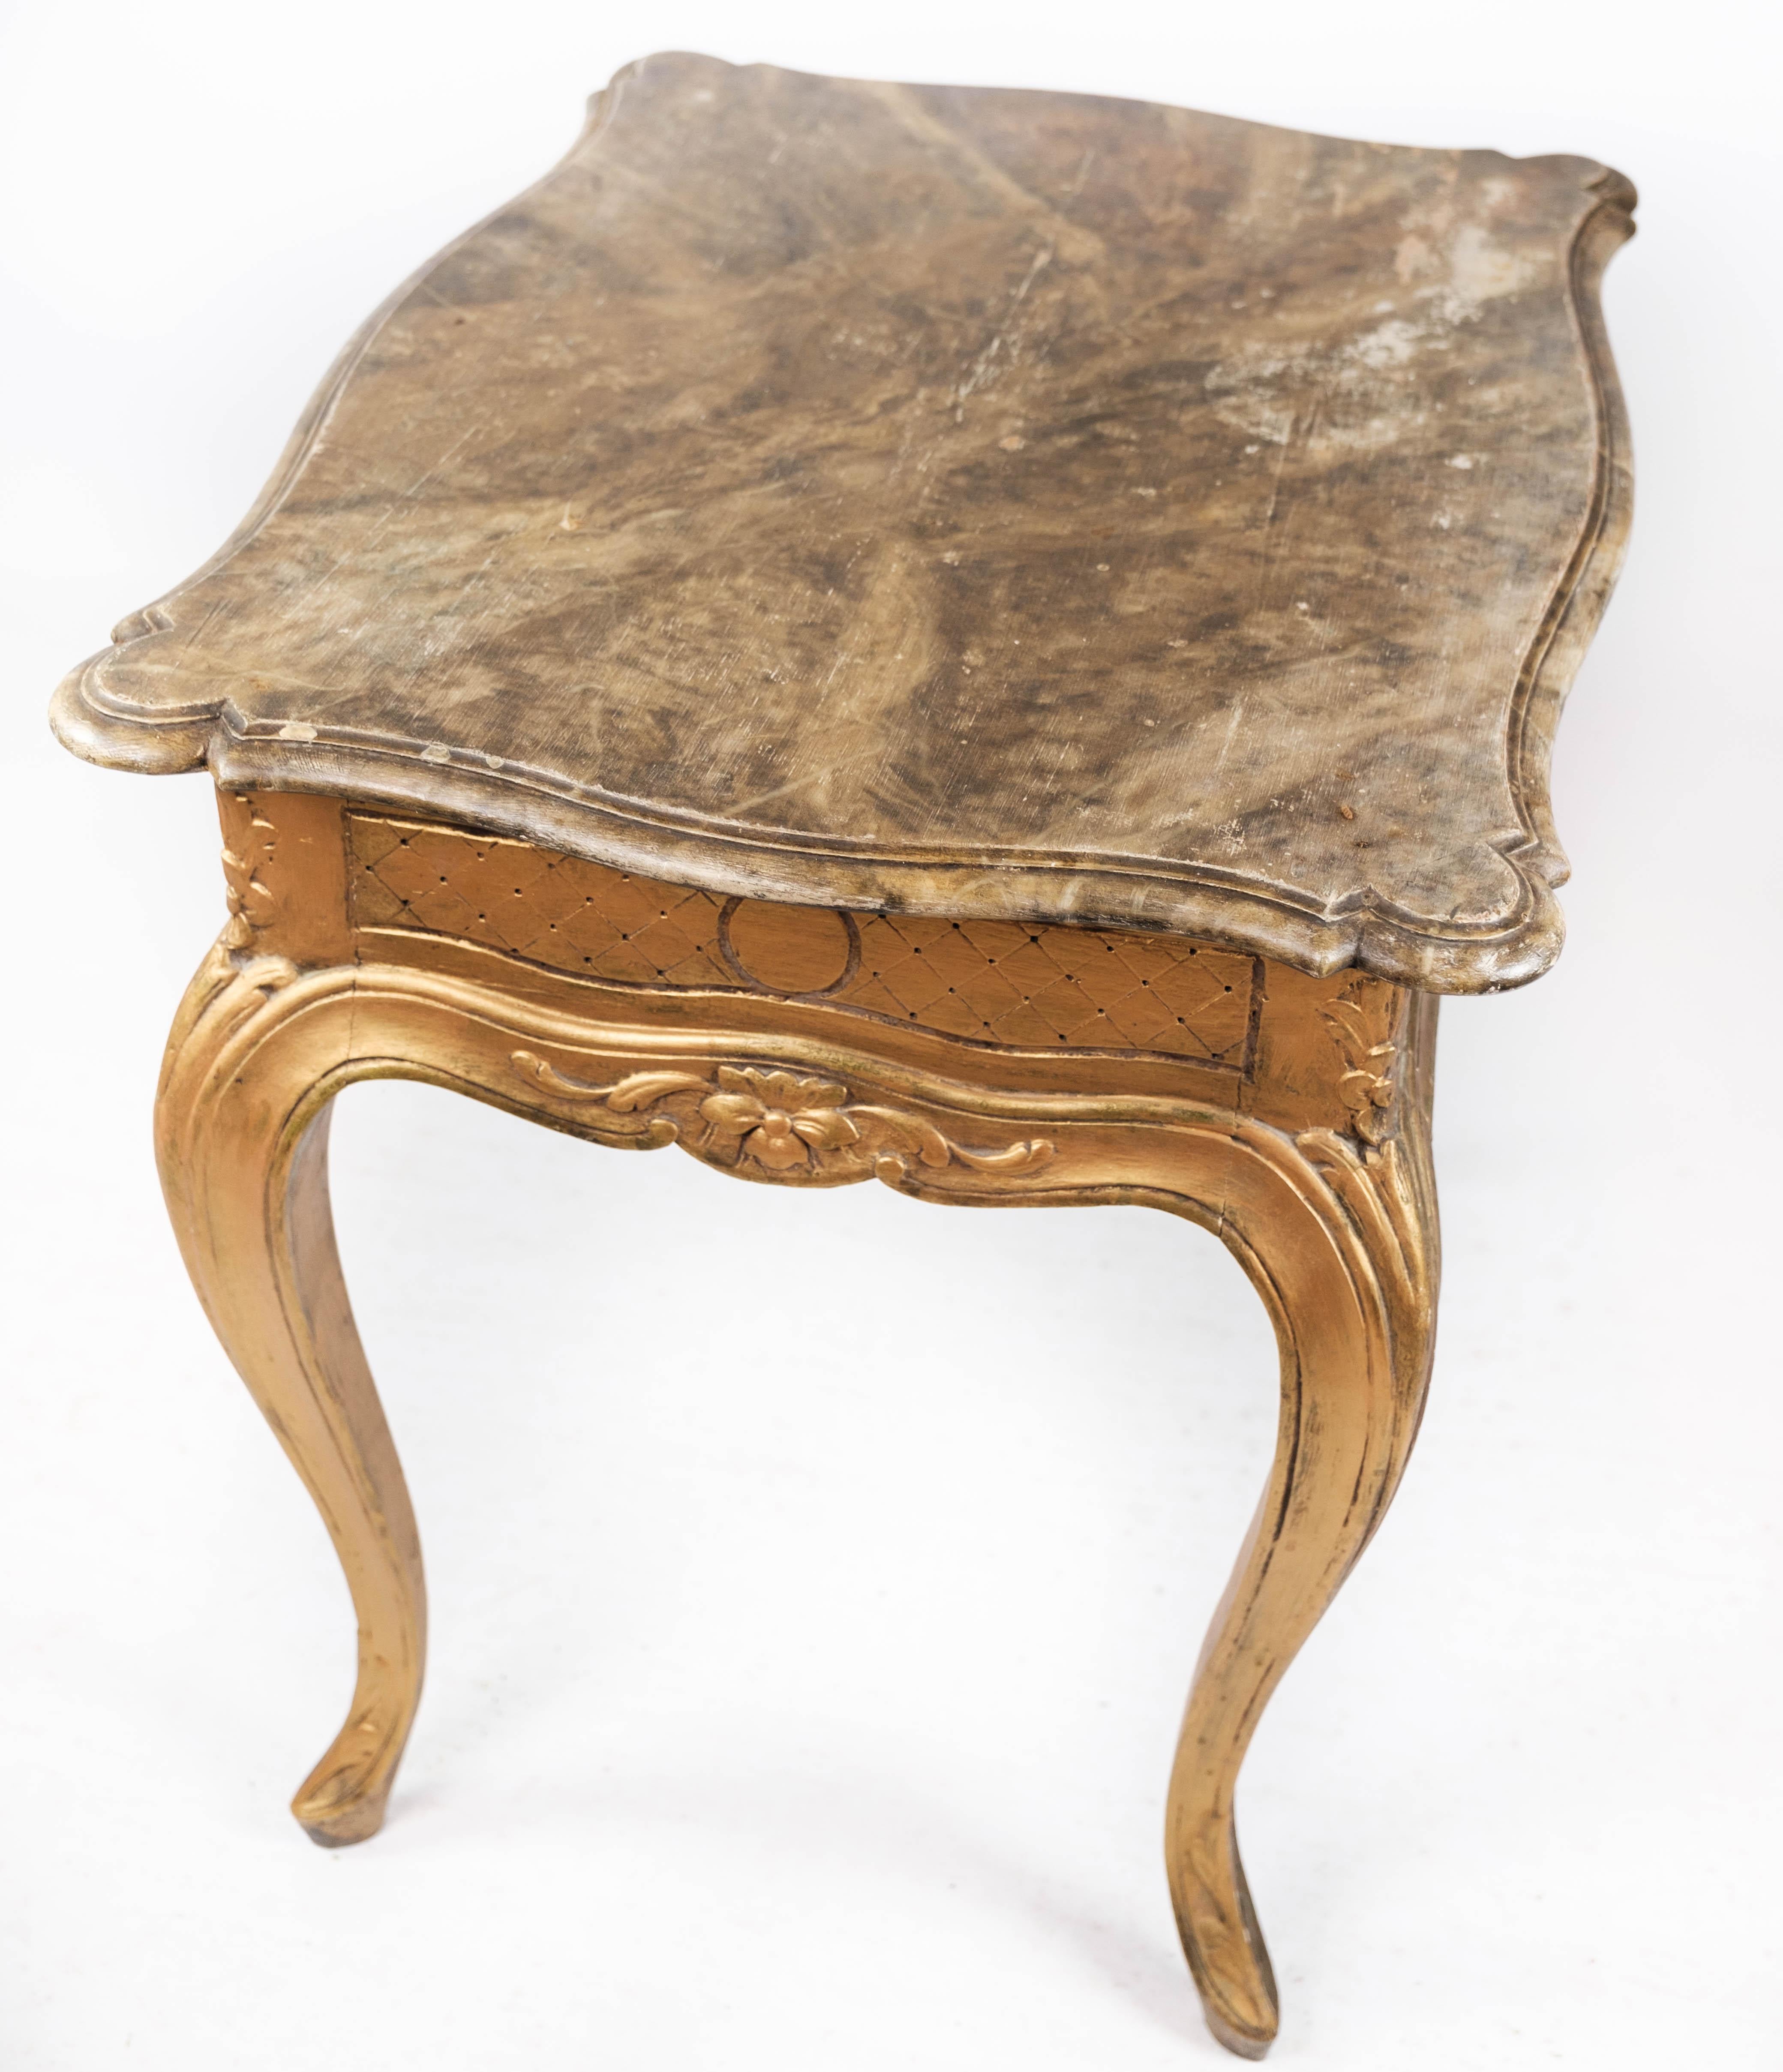 Rococo Revival Side Table with Marbled Tabletop and Frame of Gilded Wood, 1860s For Sale 4